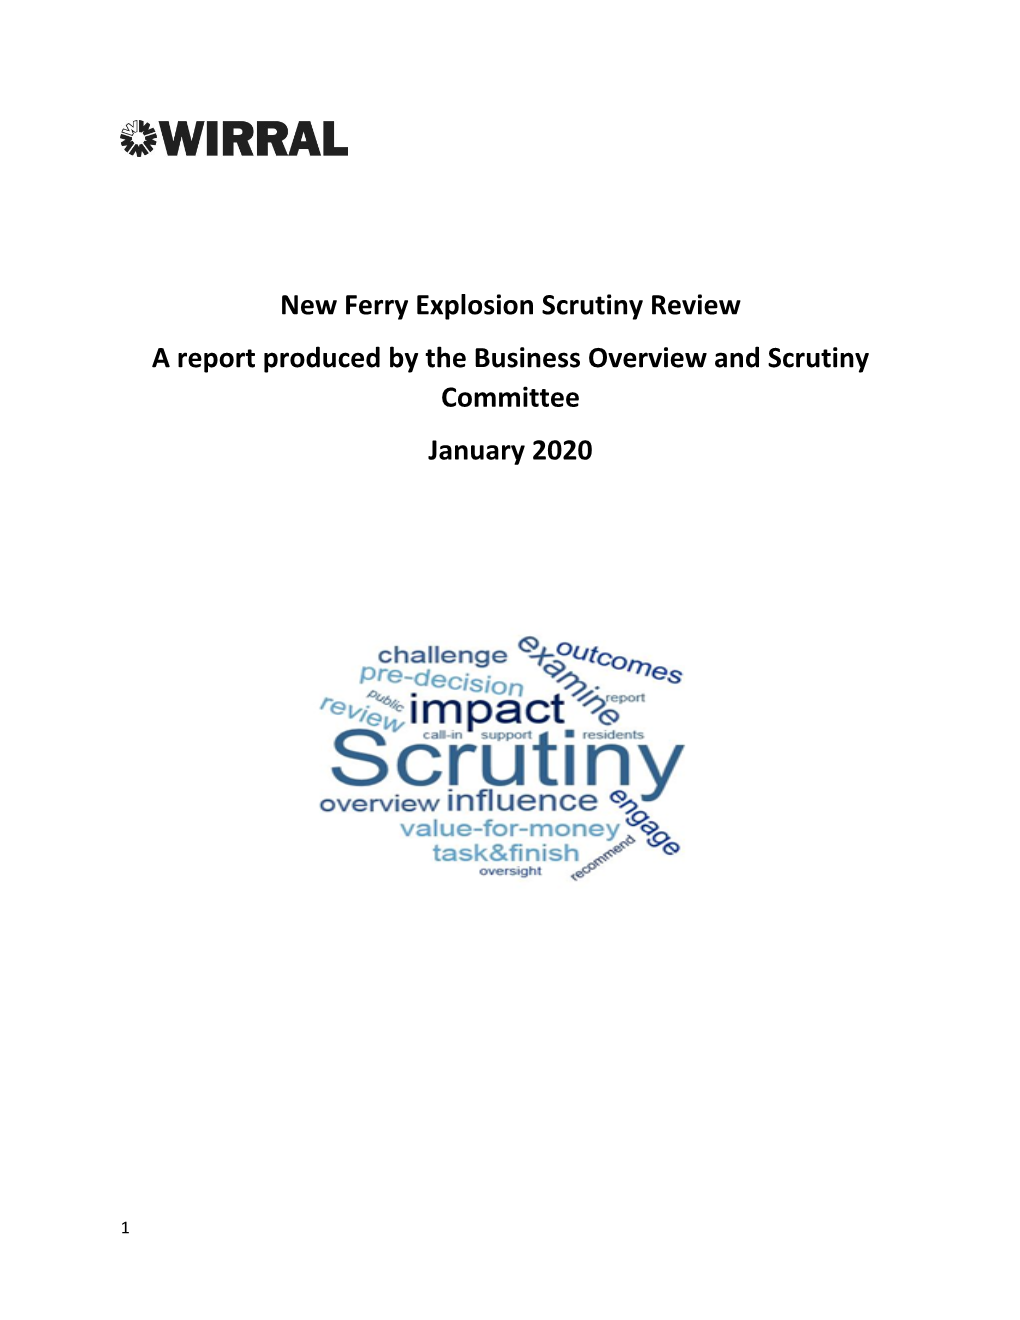 New Ferry Explosion Scrutiny Review a Report Produced by the Business Overview and Scrutiny Committee January 2020